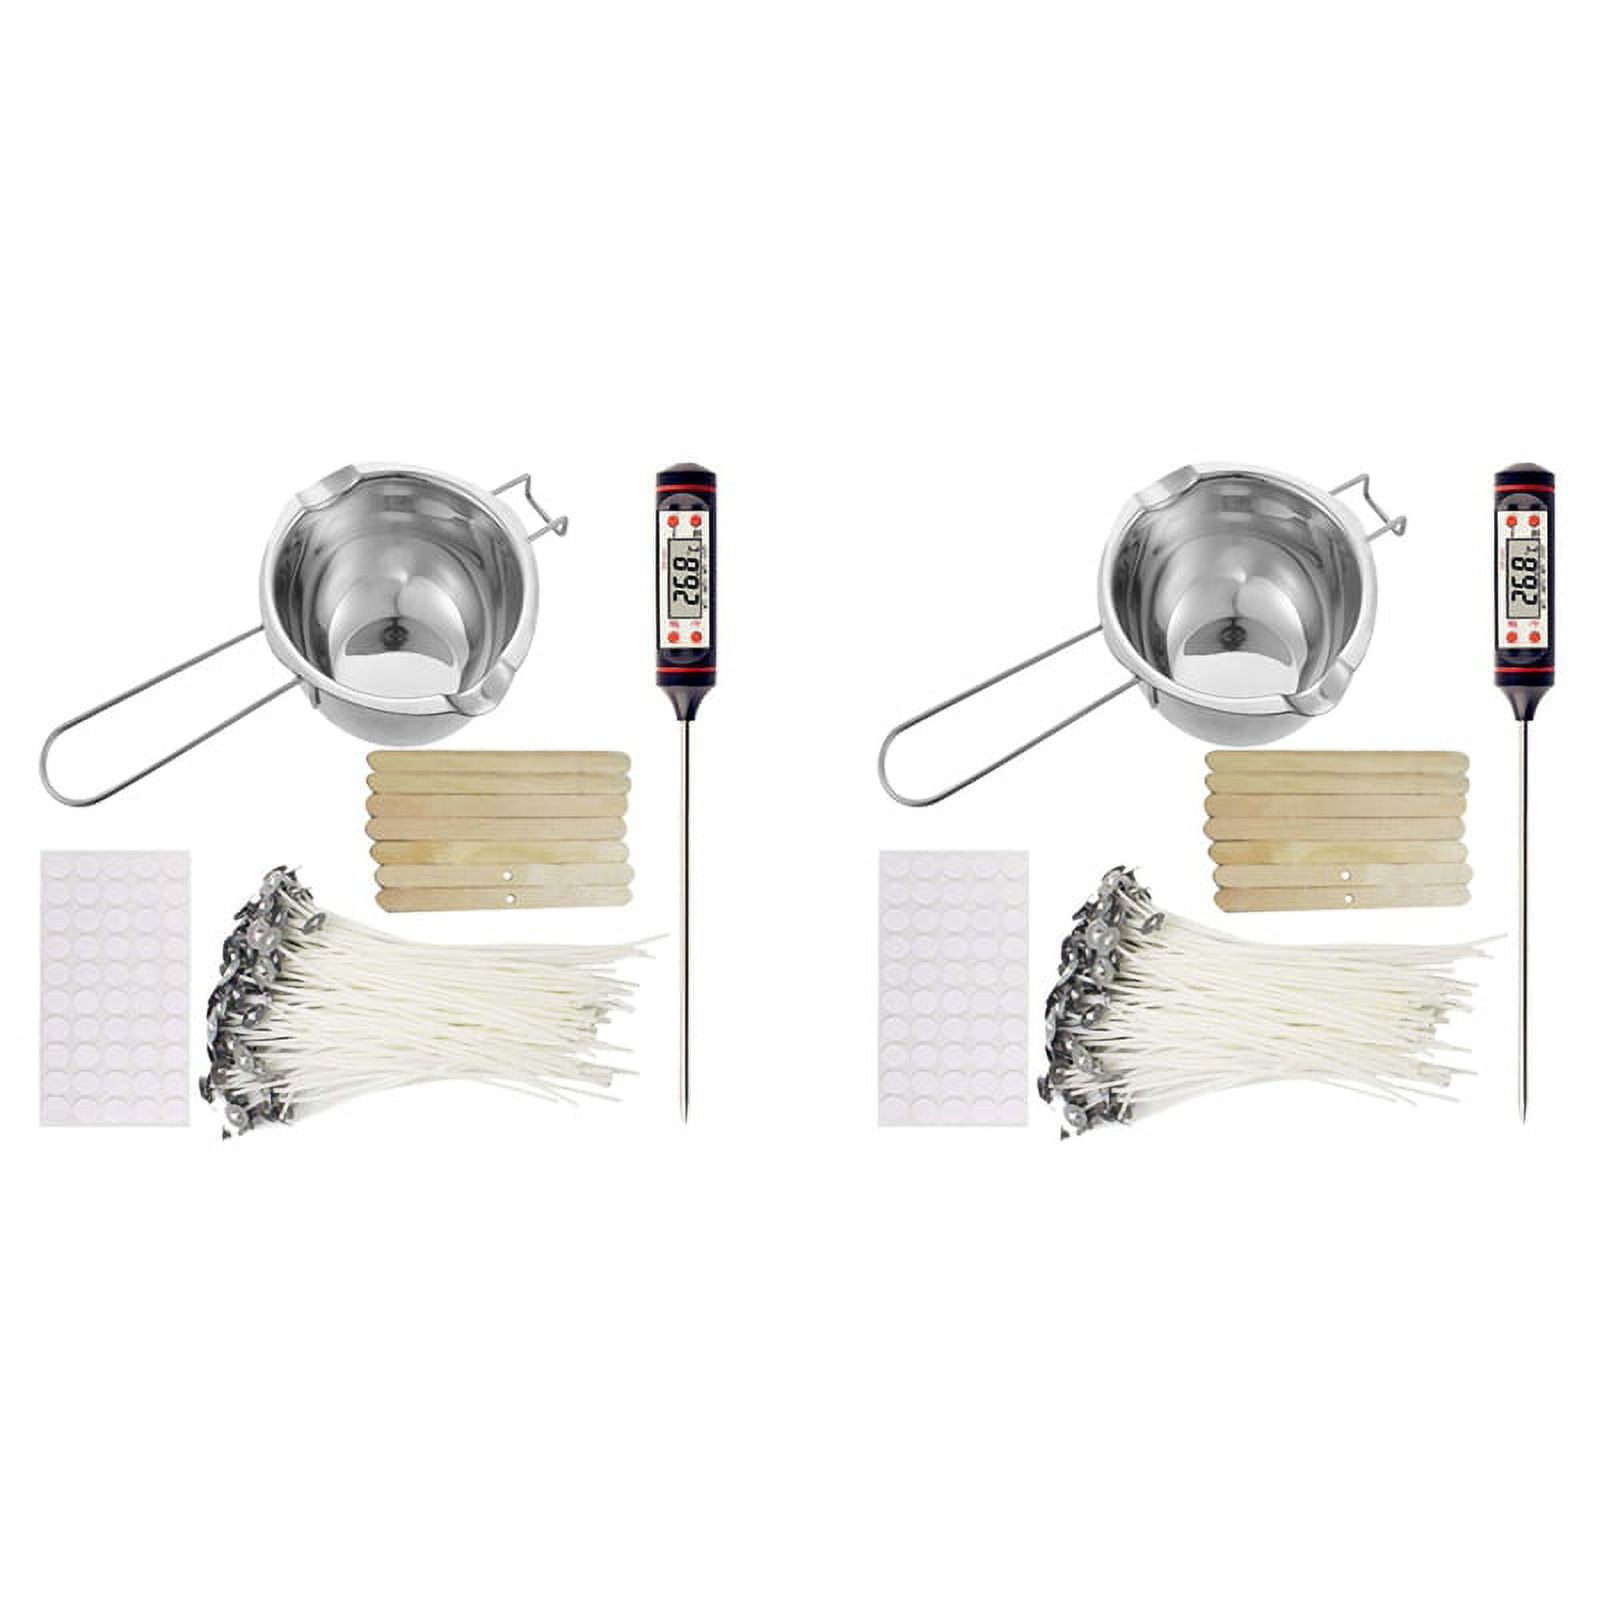 Candle Making Kit,Candle Melting Pot,Candle Wicks,Wick , Candle Wicks Holder,Thermometer and Stirring Sticks, Silver